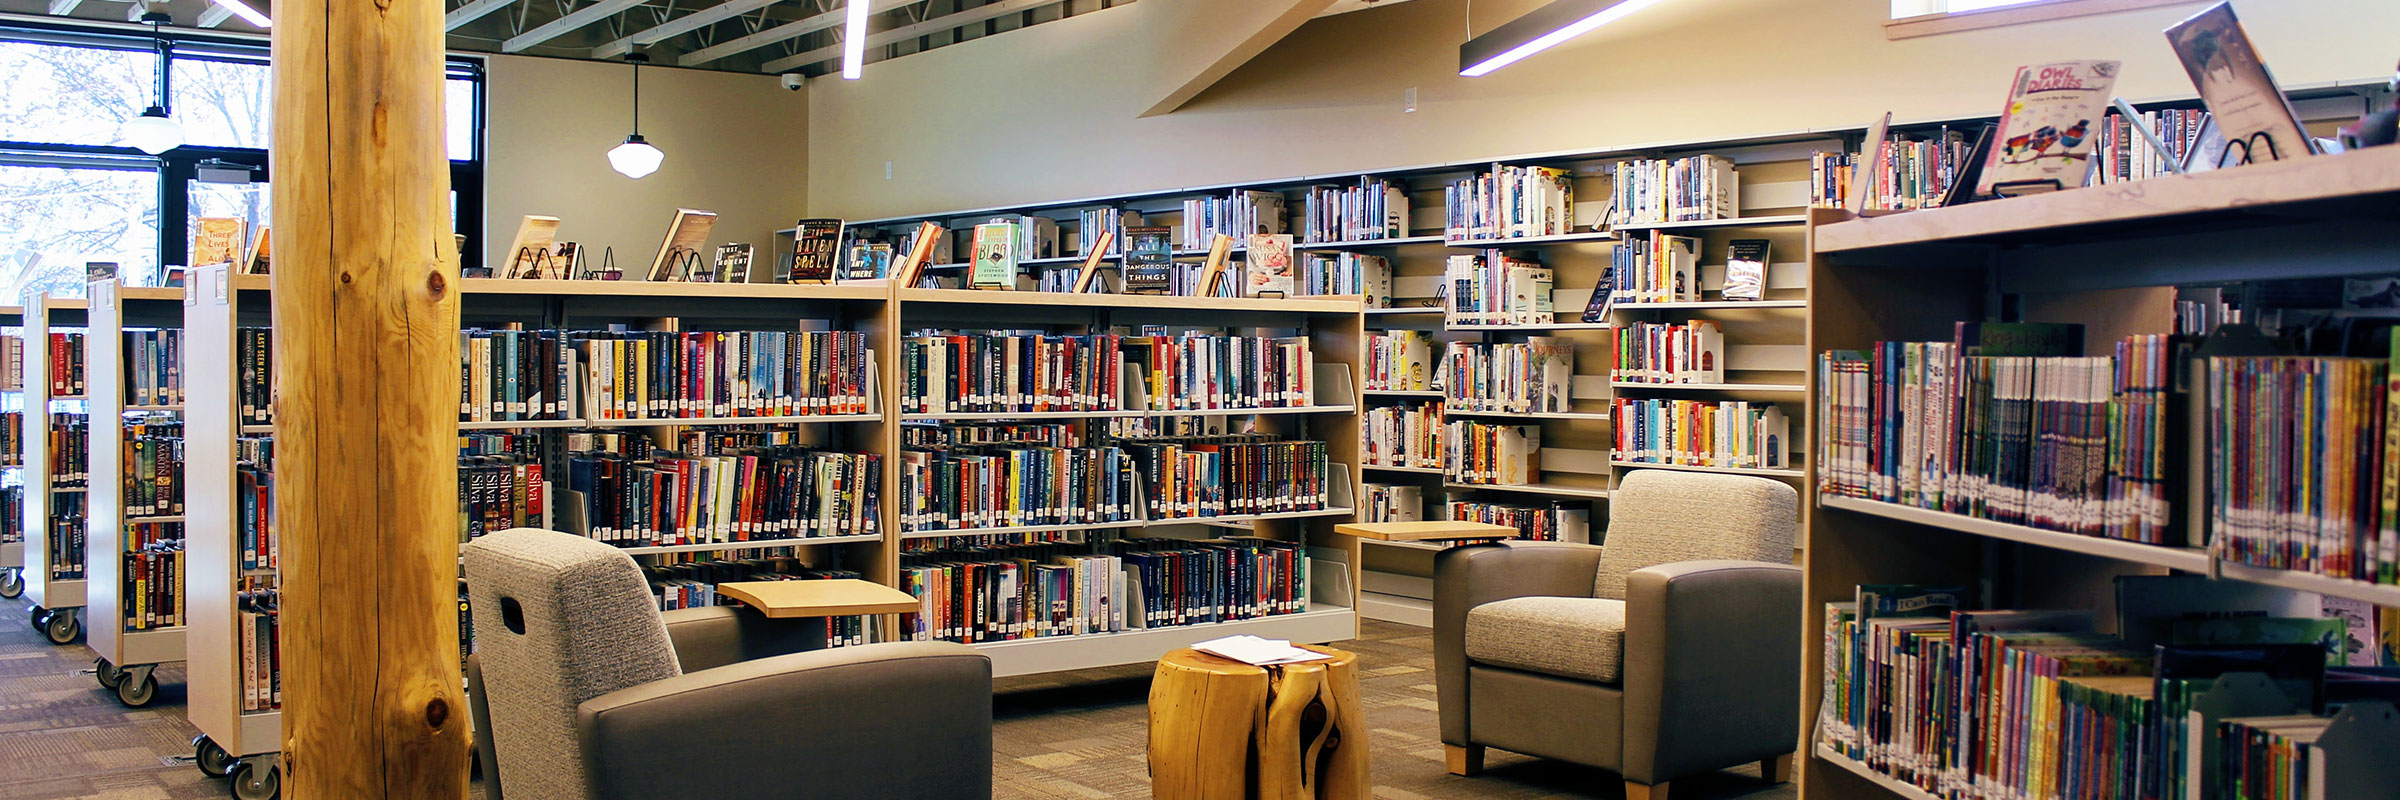 Seating area and shelving inside the Southern Wasco County Library